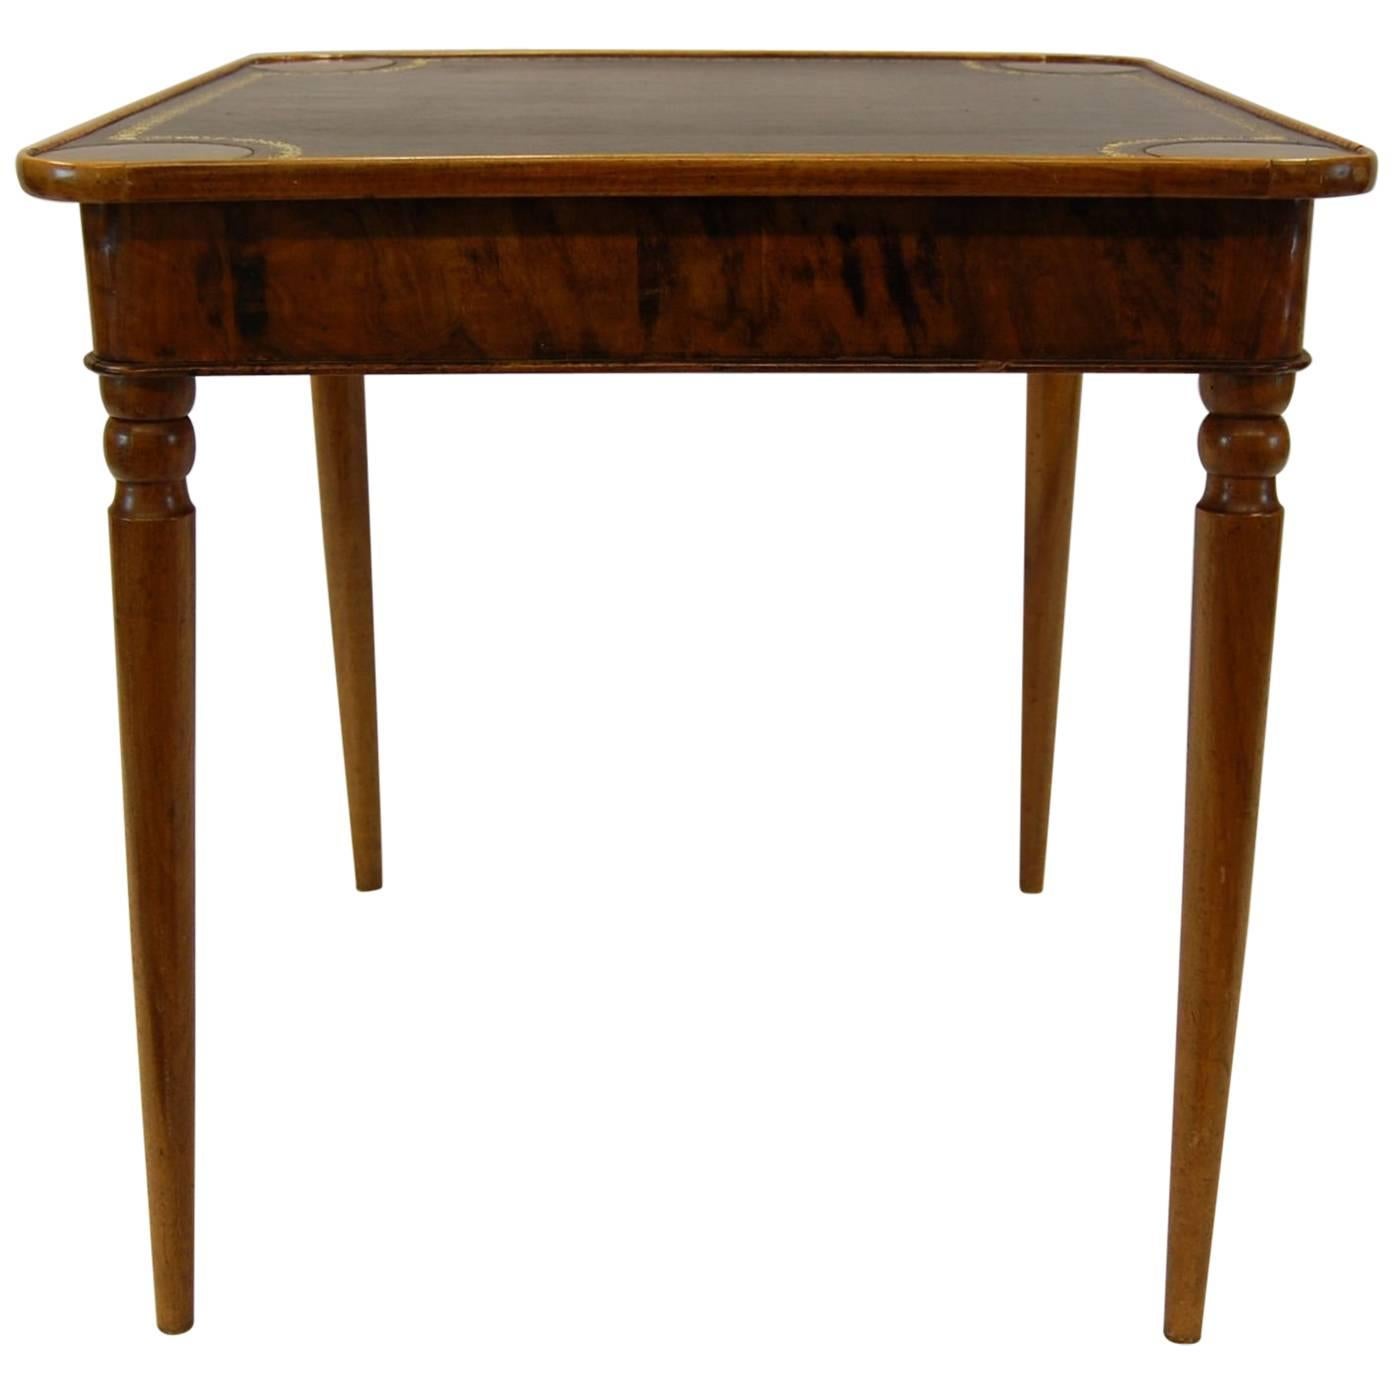 Antique Walnut French Card Table with Leather Top, circa 1830